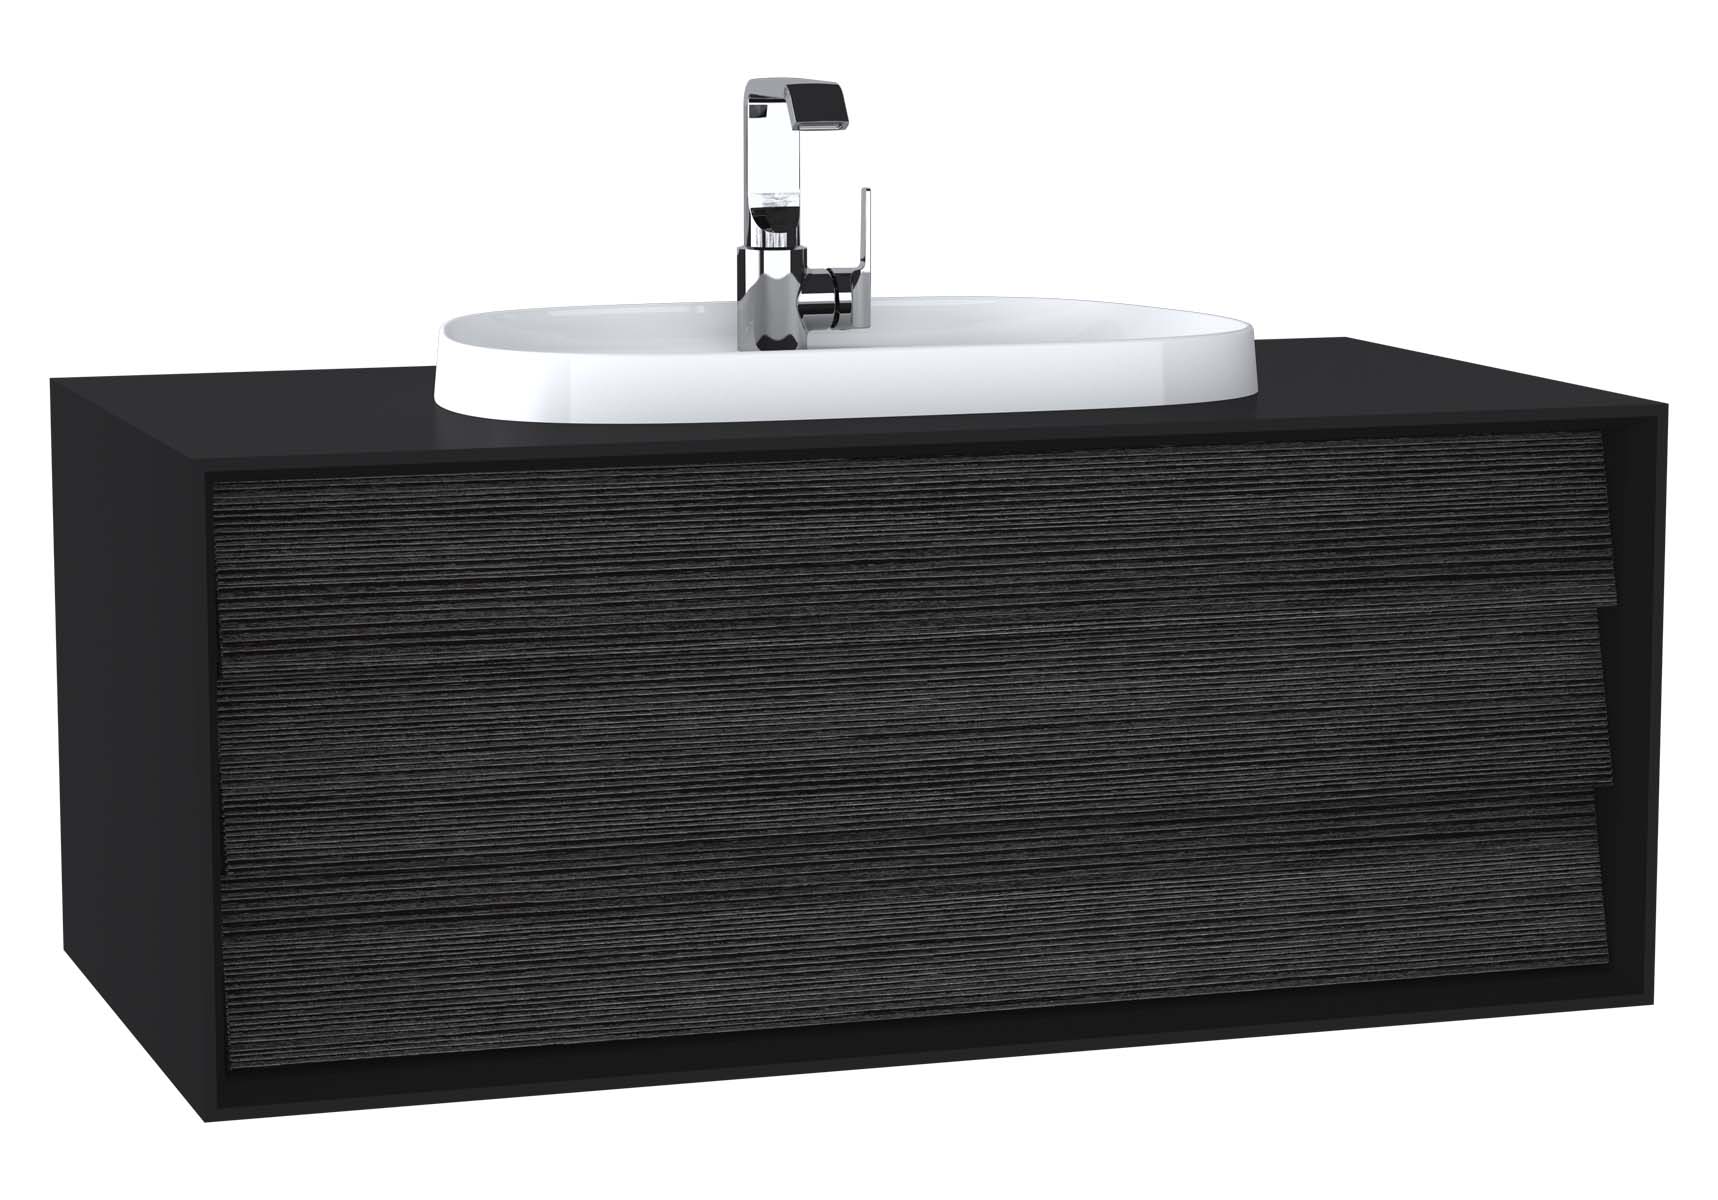 Frame Washbasin Unit, 120 cm, with 1 drawer, with countertop TV-shape washbasin, with faucet hole, Matte Black